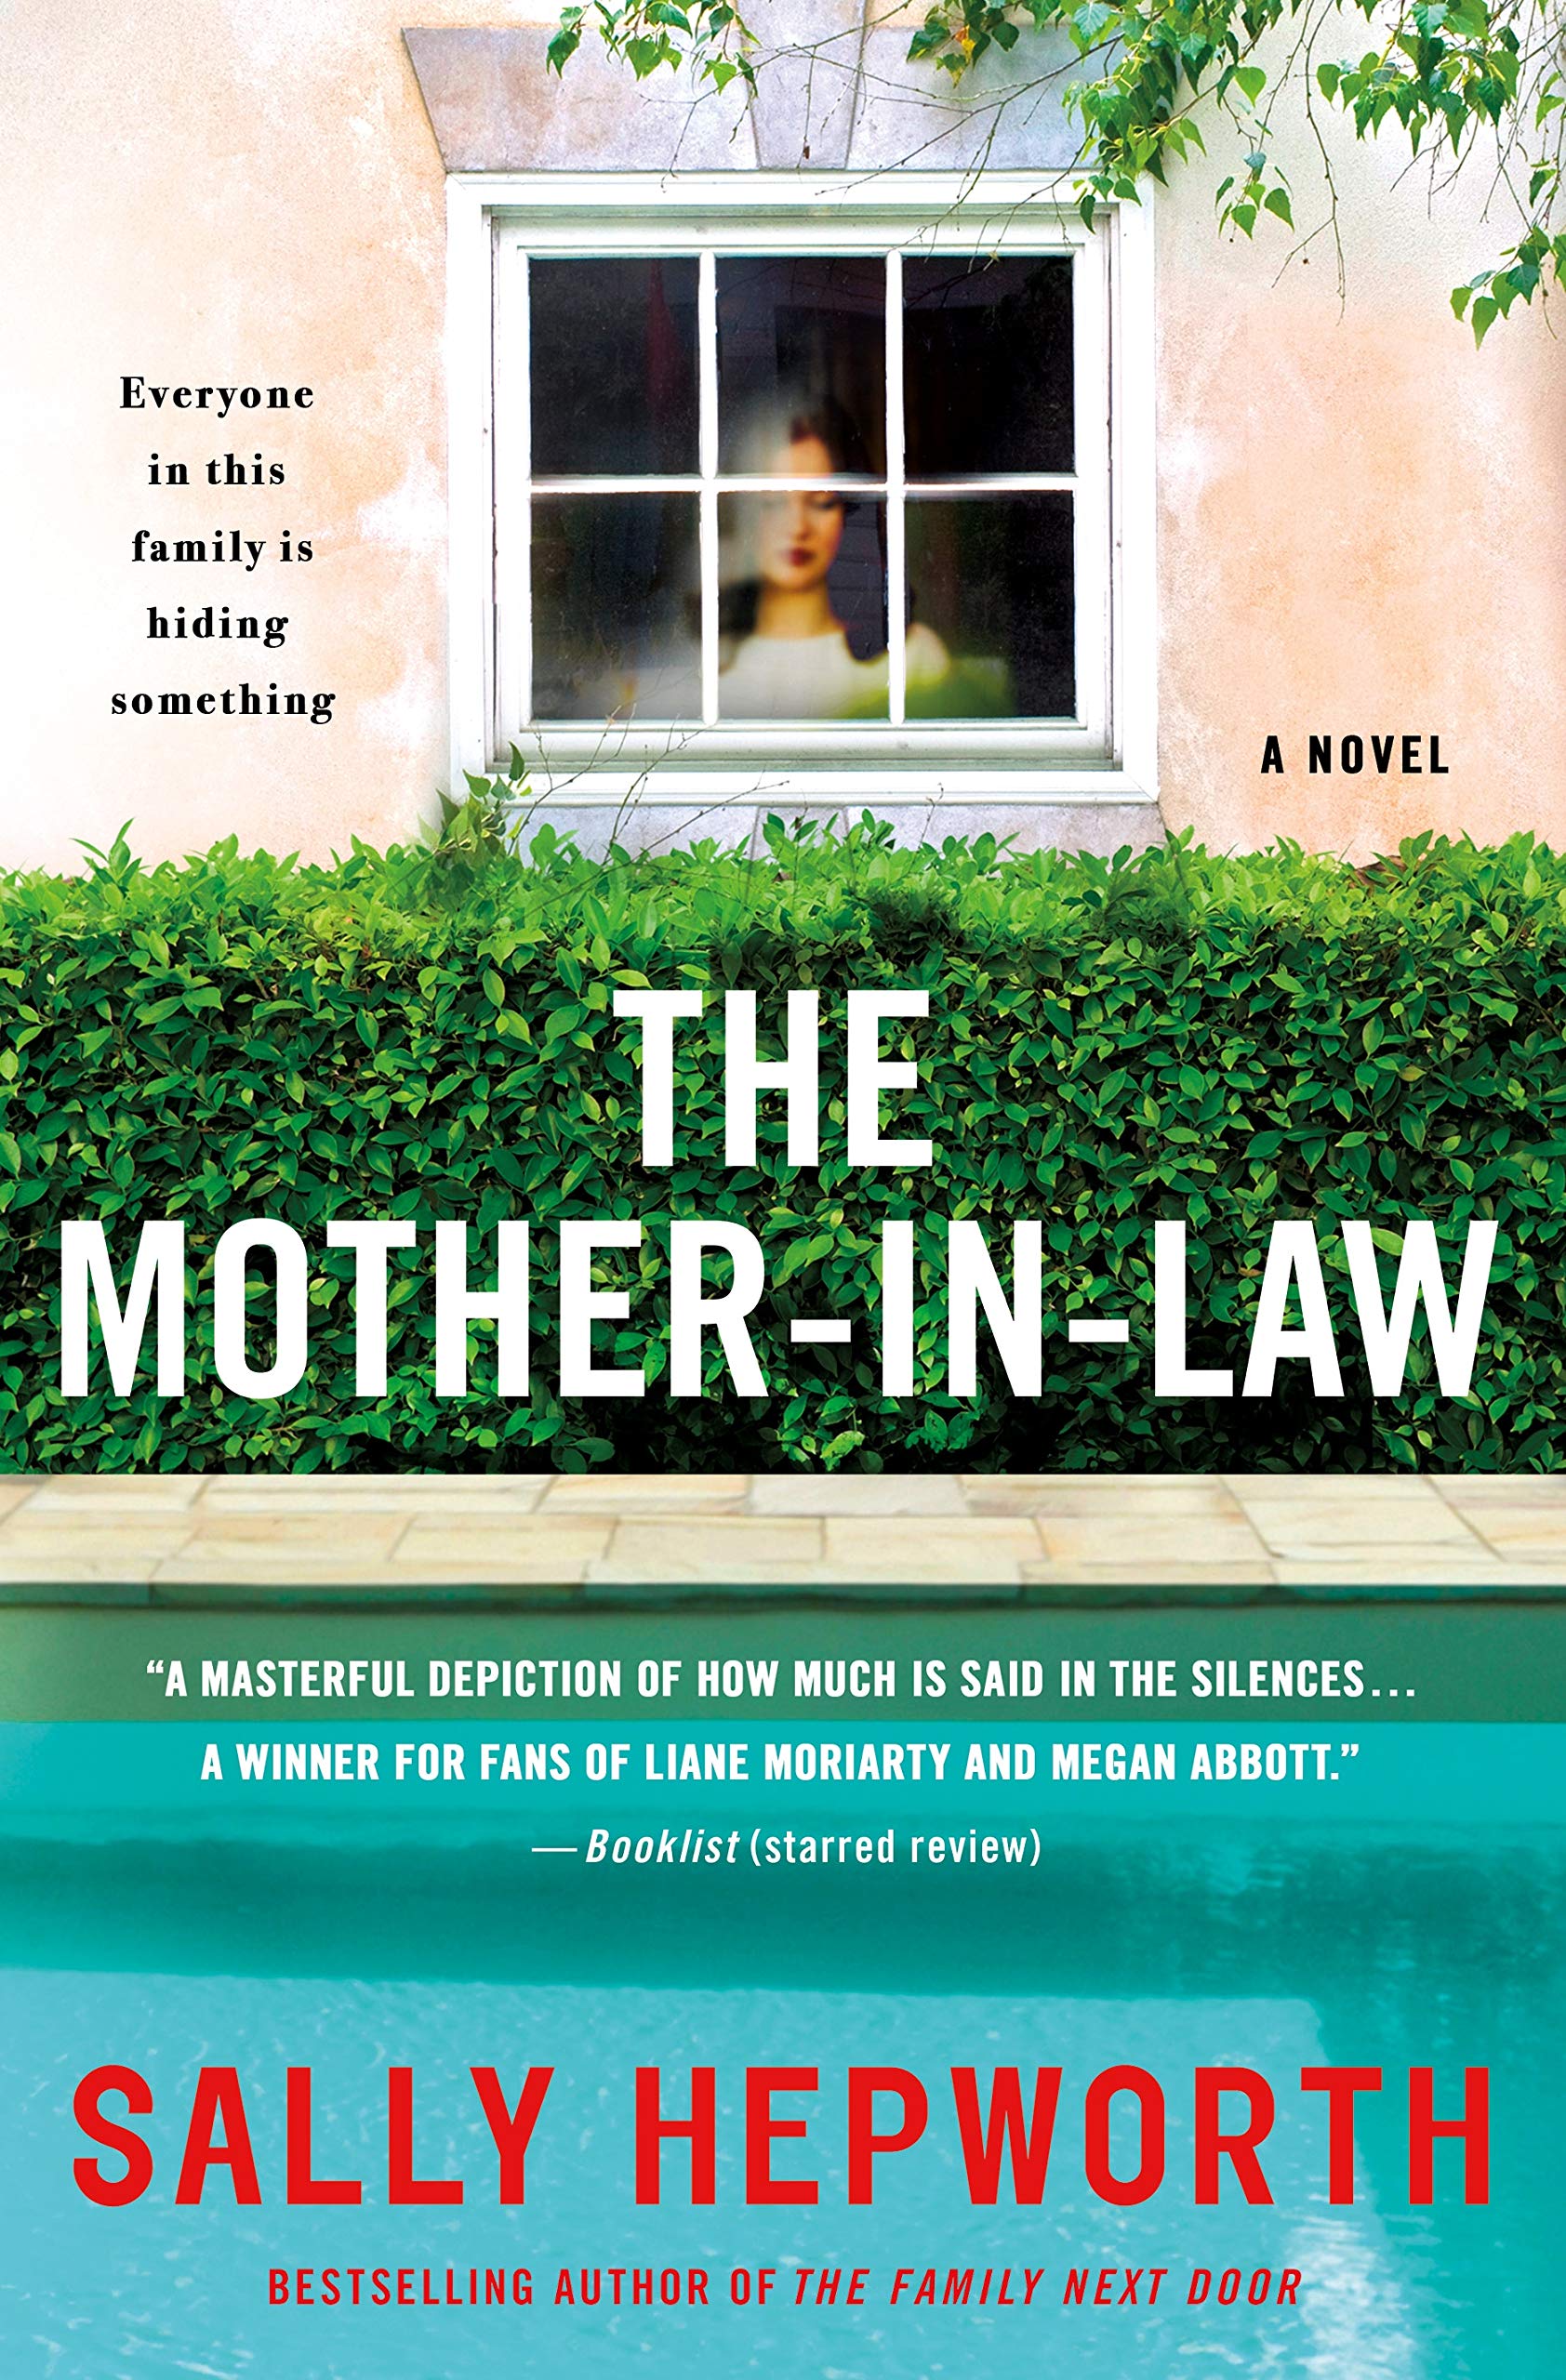 Book cover of The Mother-in-Law by Sally Hepworth.